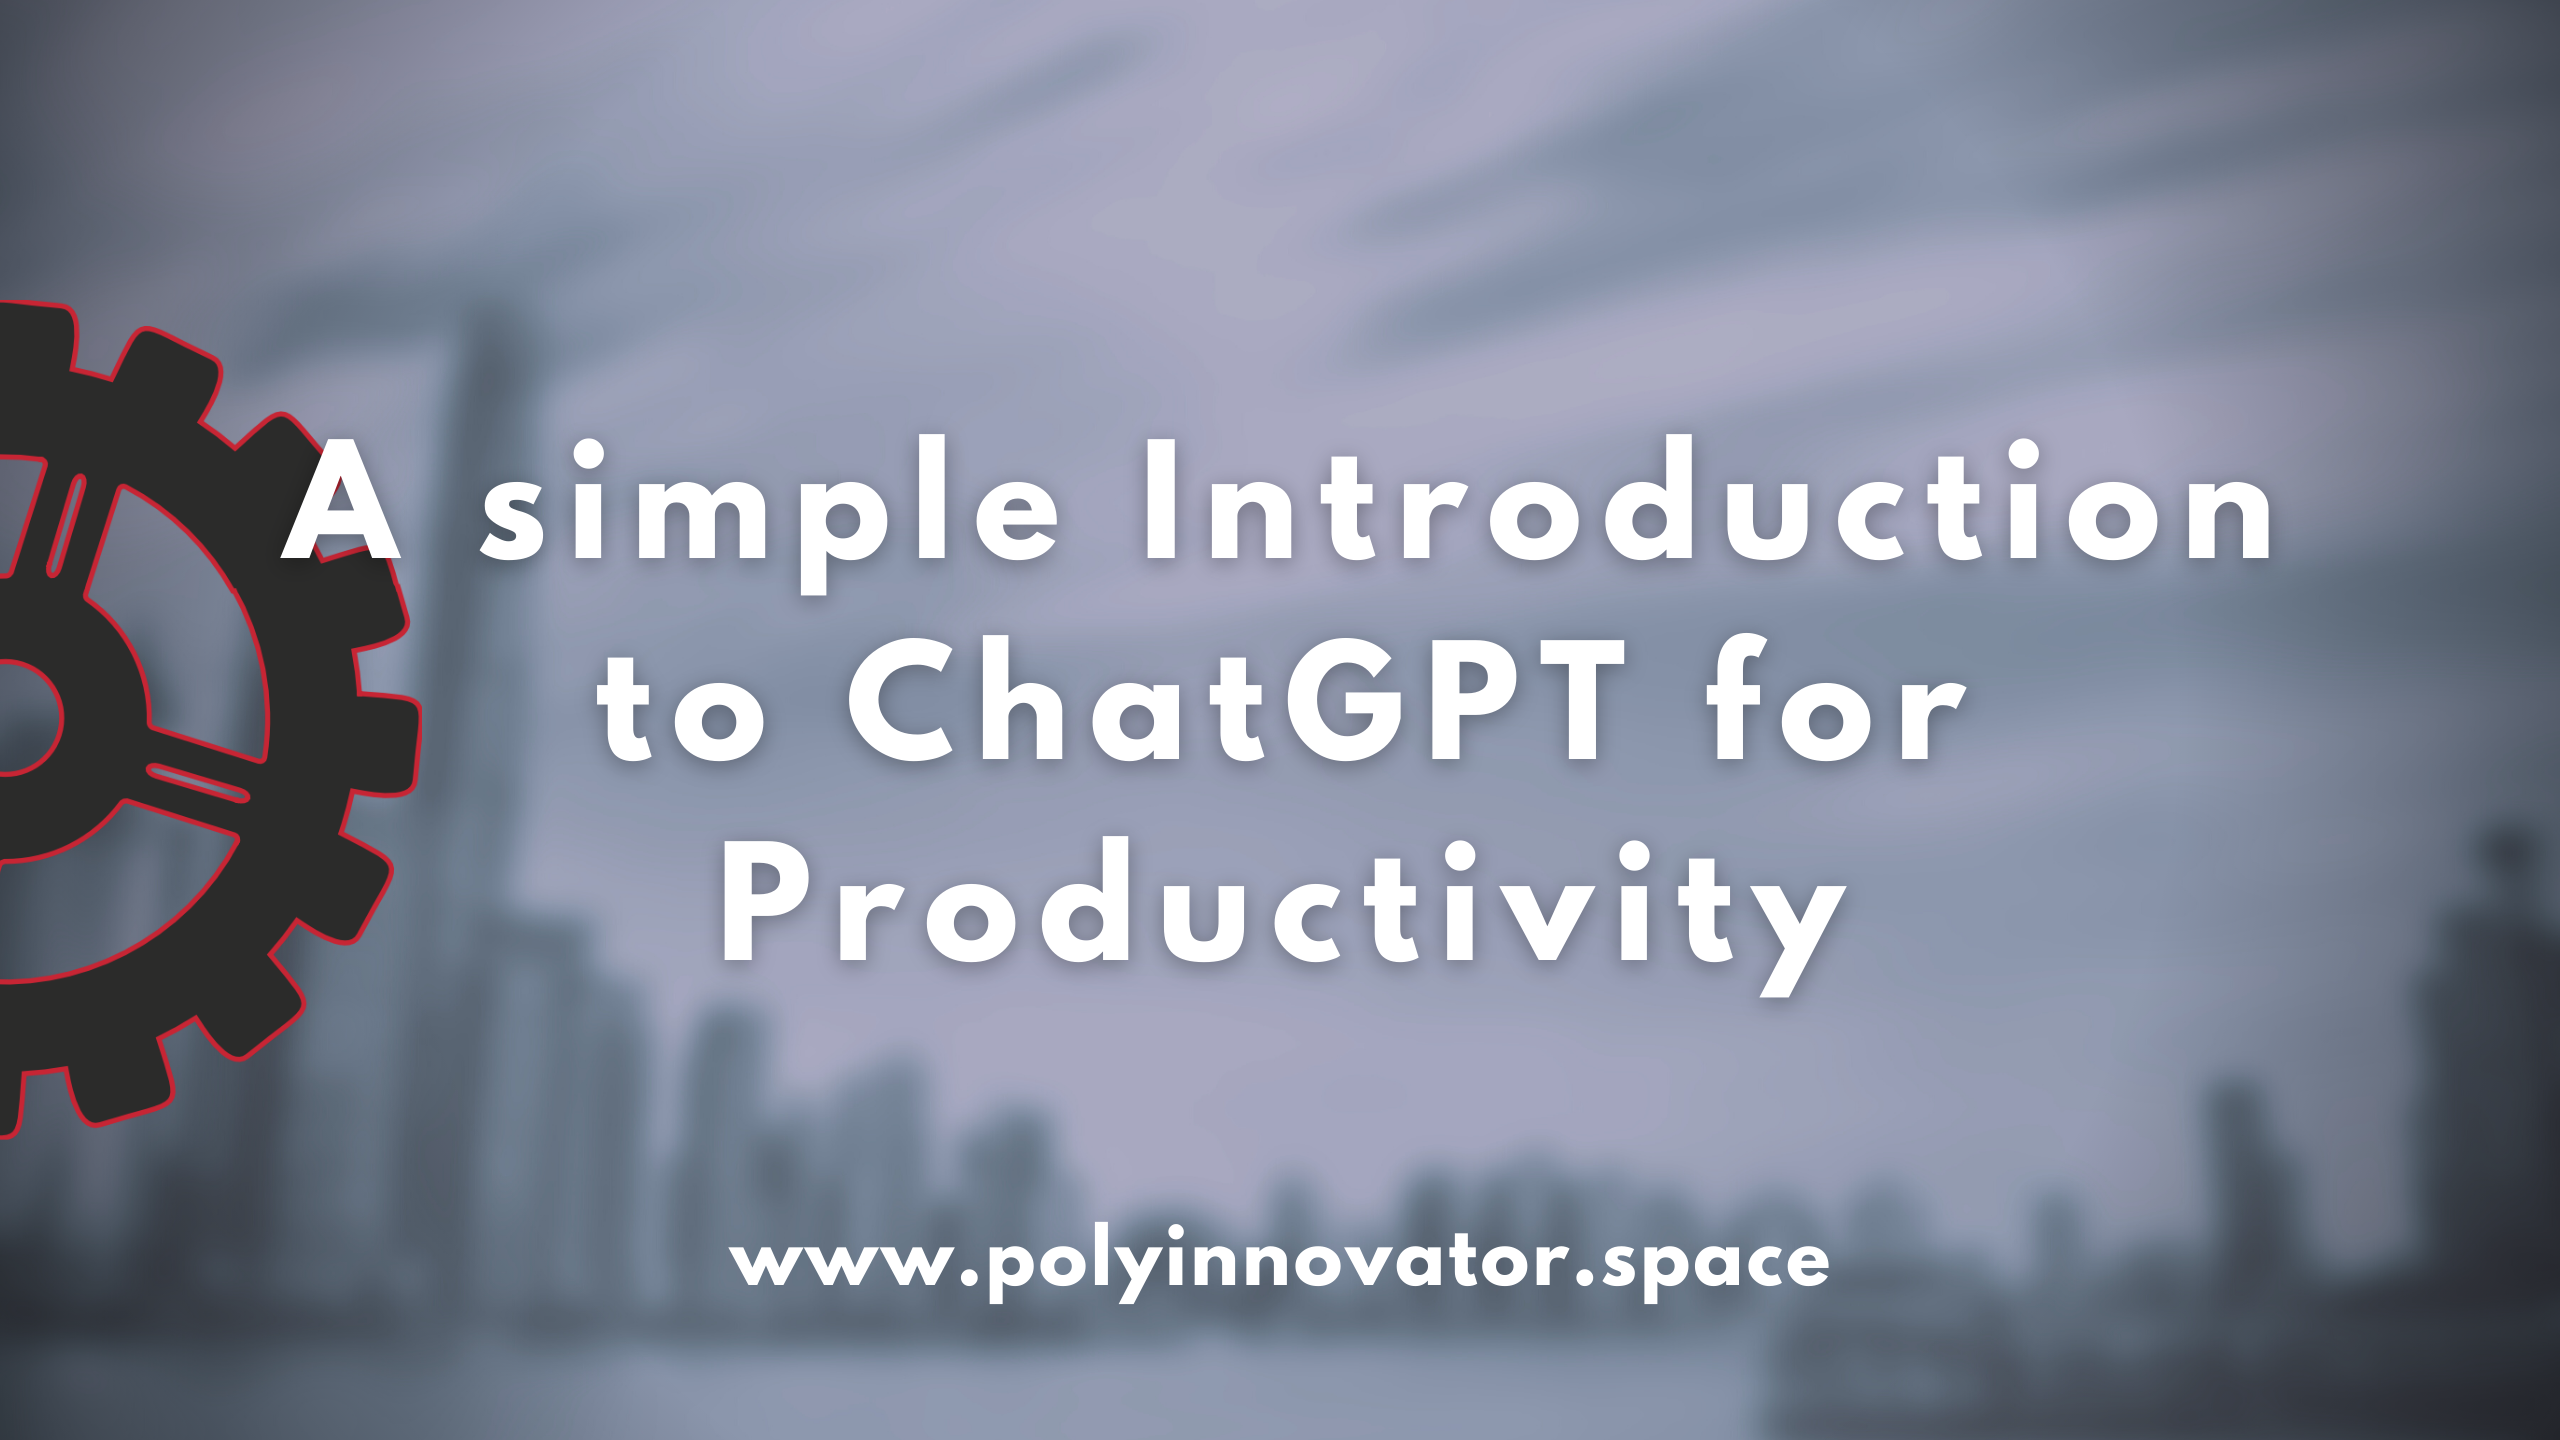 A simple Introduction to ChatGPT for Productivity